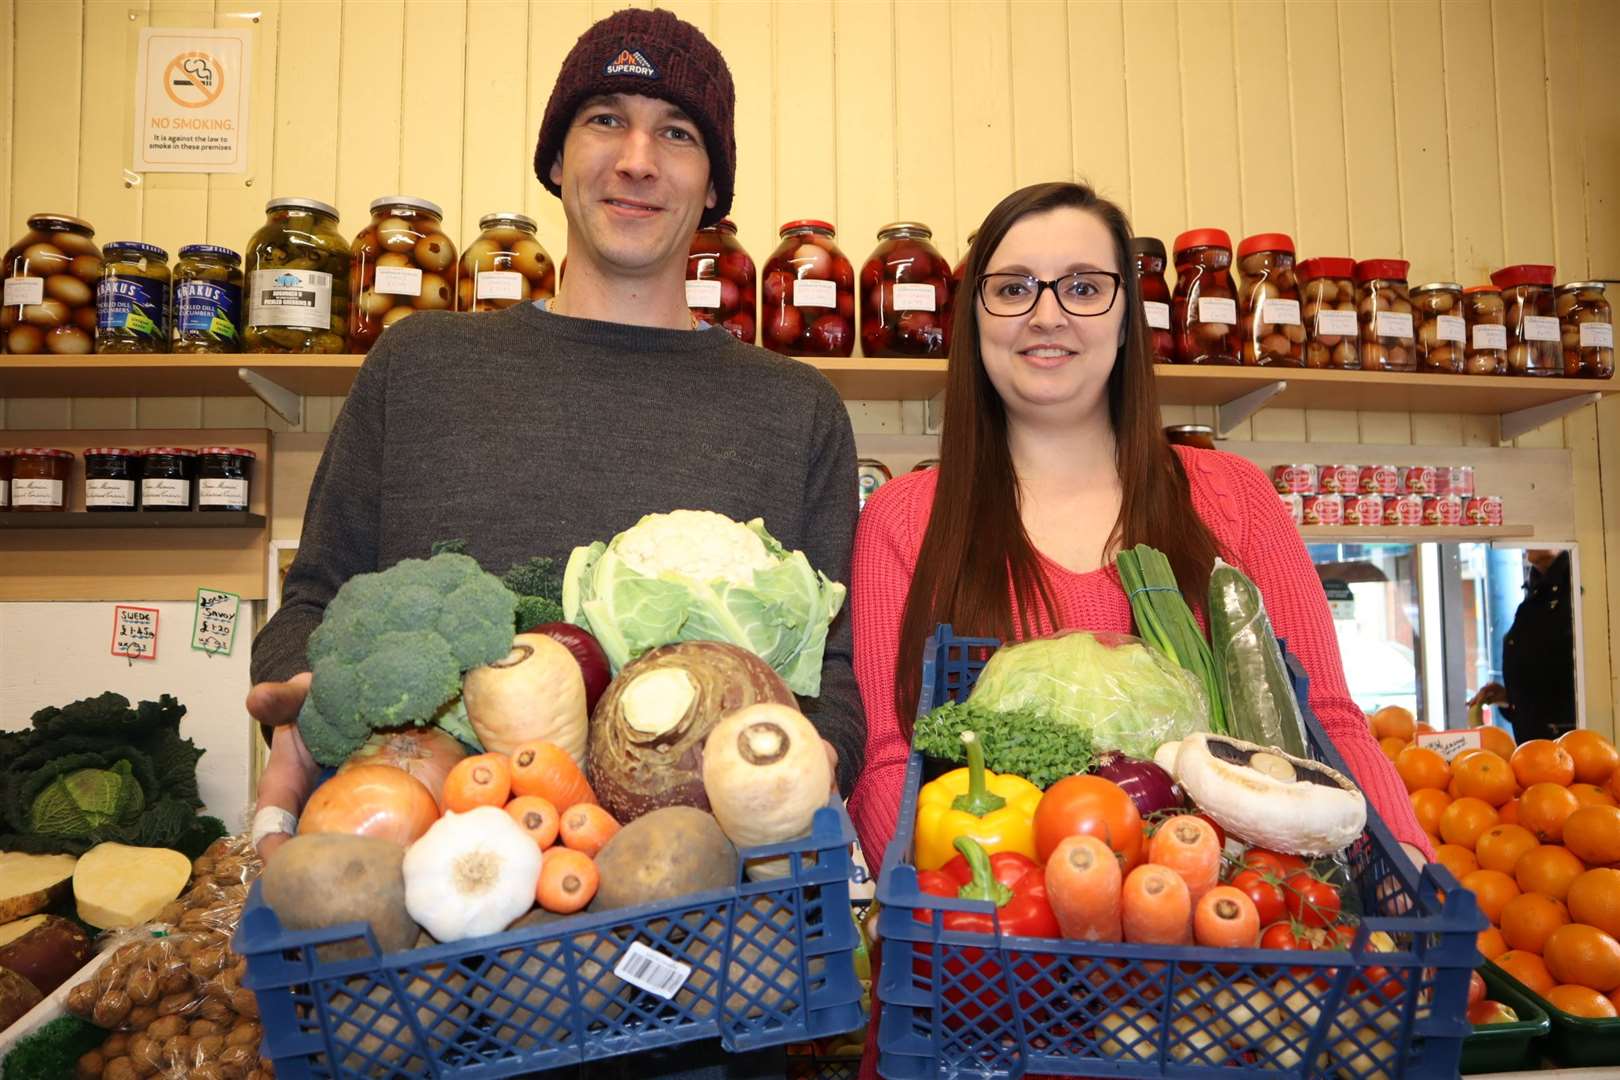 Lewis and Stacey Feaver of Rob's Traditional Greengrocery in Sheerness